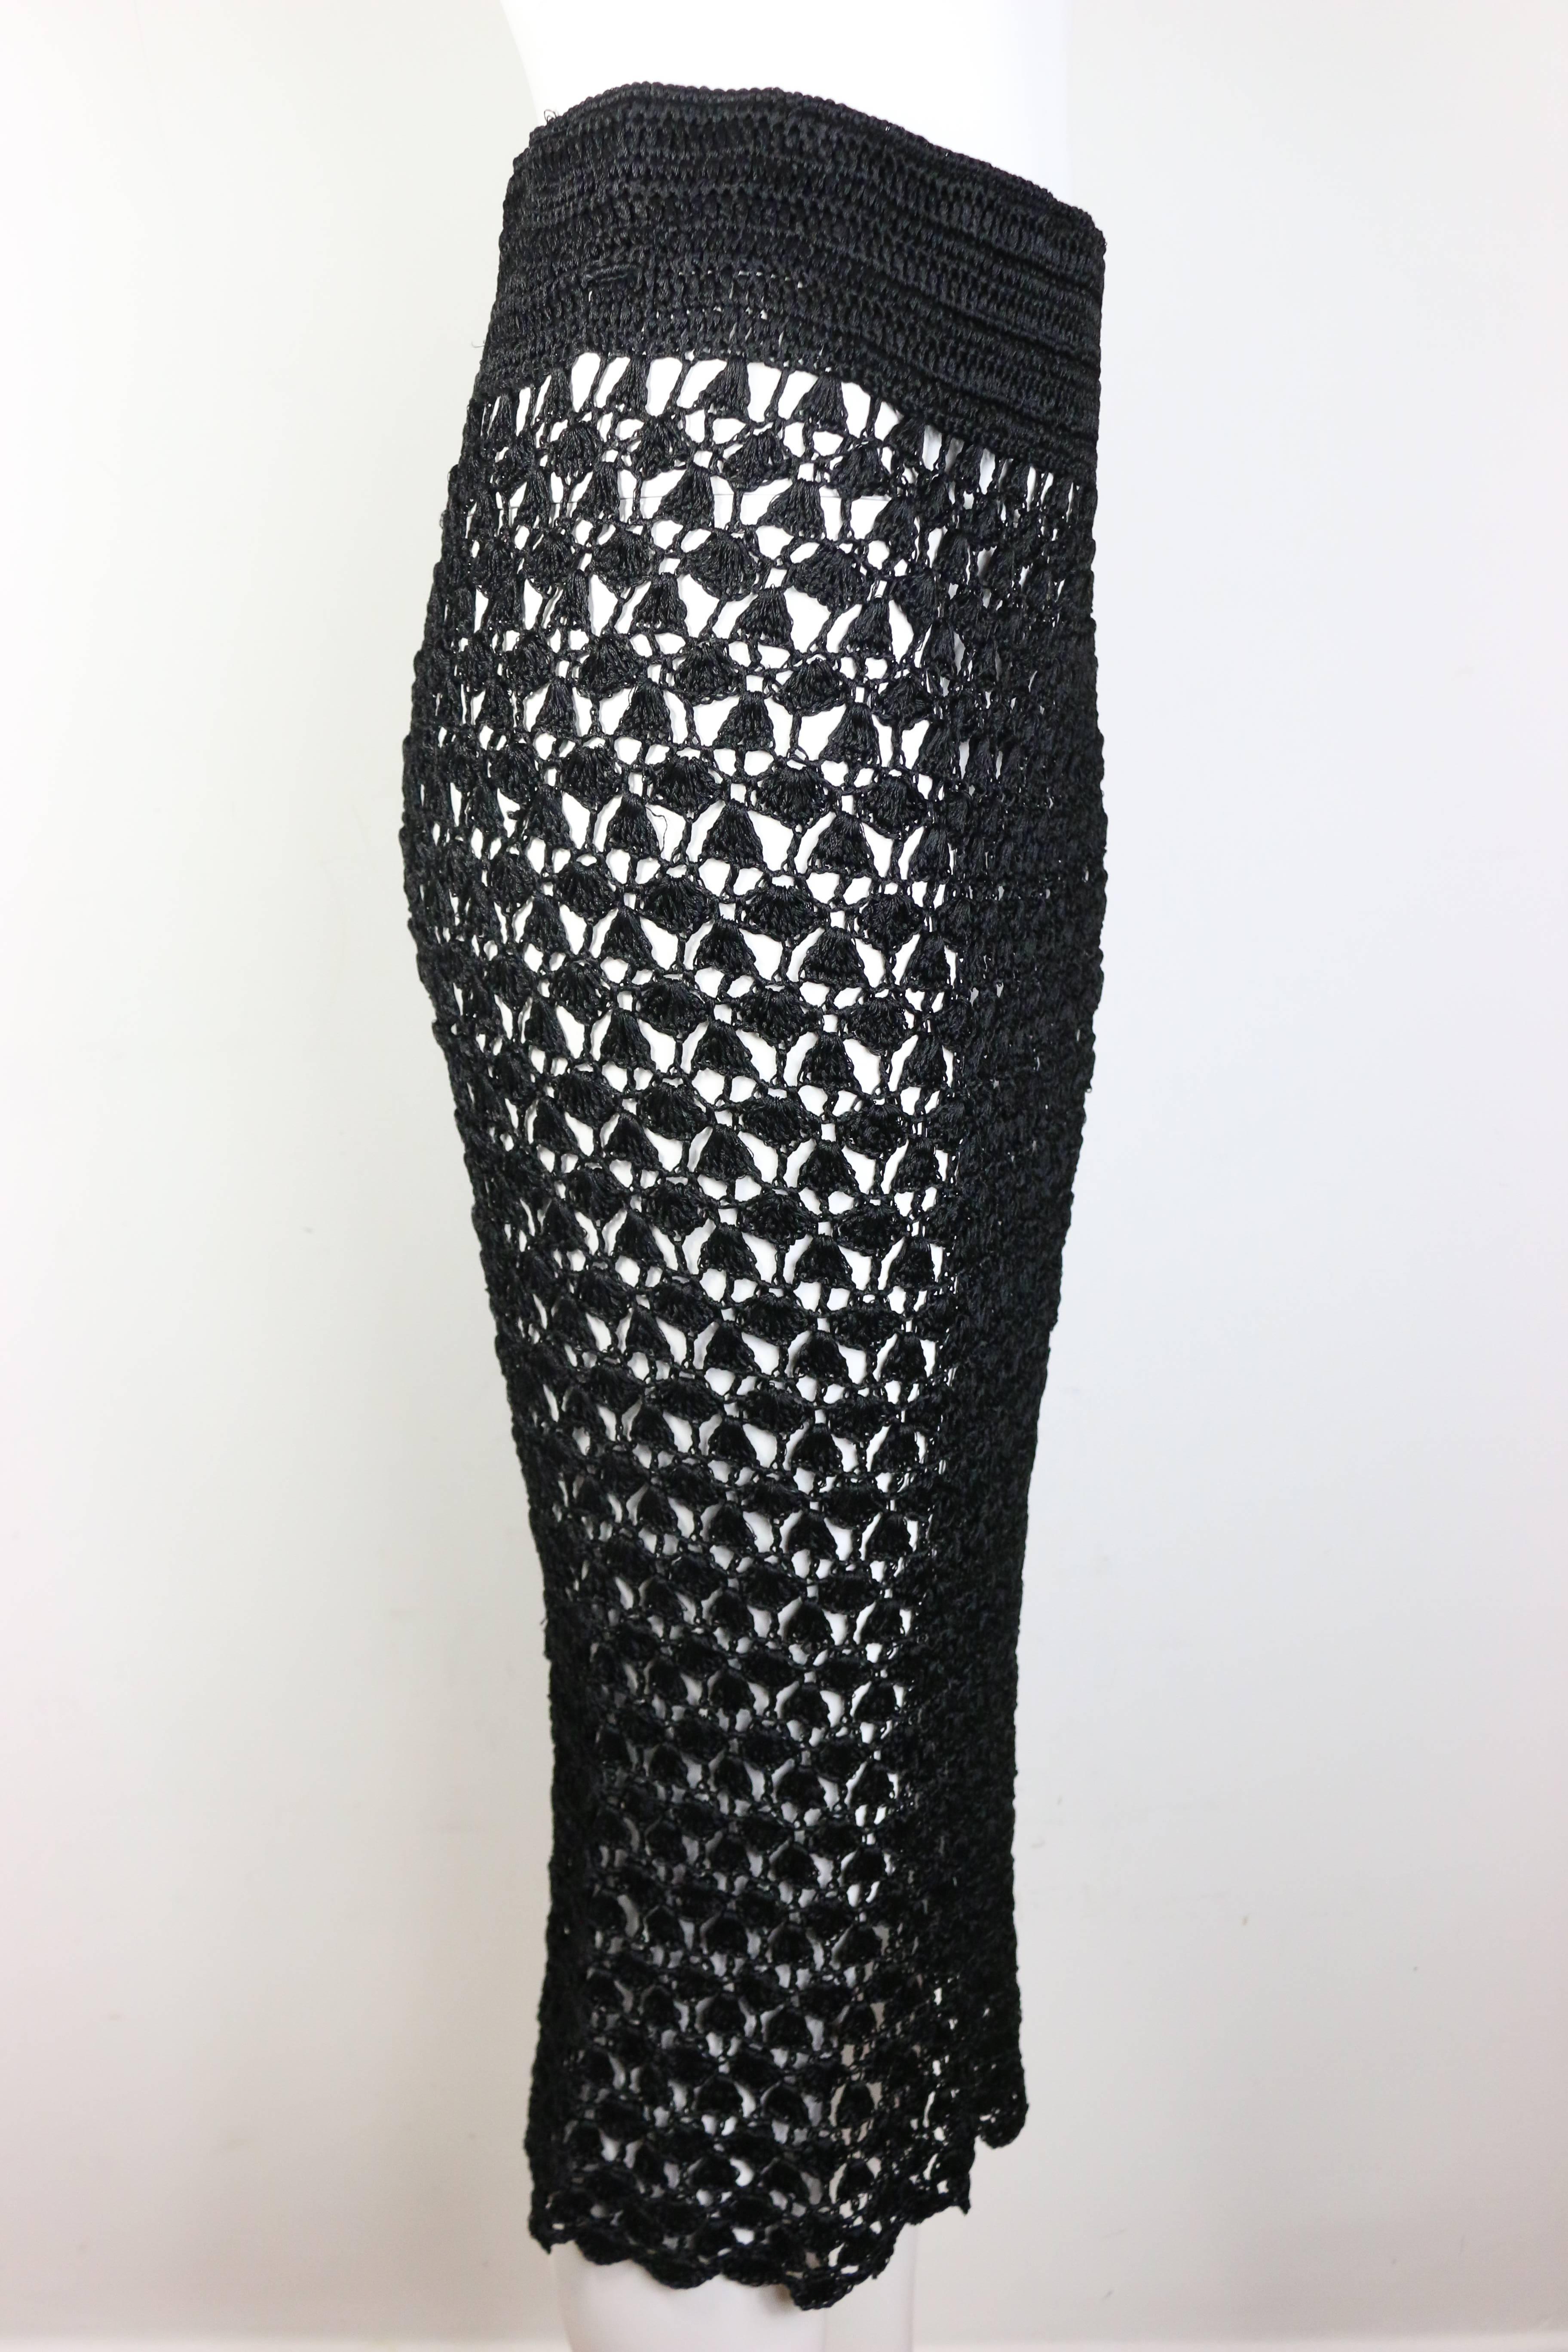 - Vintage 90s Dolce and Gabbana black handmade knitted knee length pencil skirt. This handmade item is very rare and precious.  Featuring side zipper closure and a satin lining for the waistline. One of a kind!

- Made in Italy. 

- Size M. 

- 100%